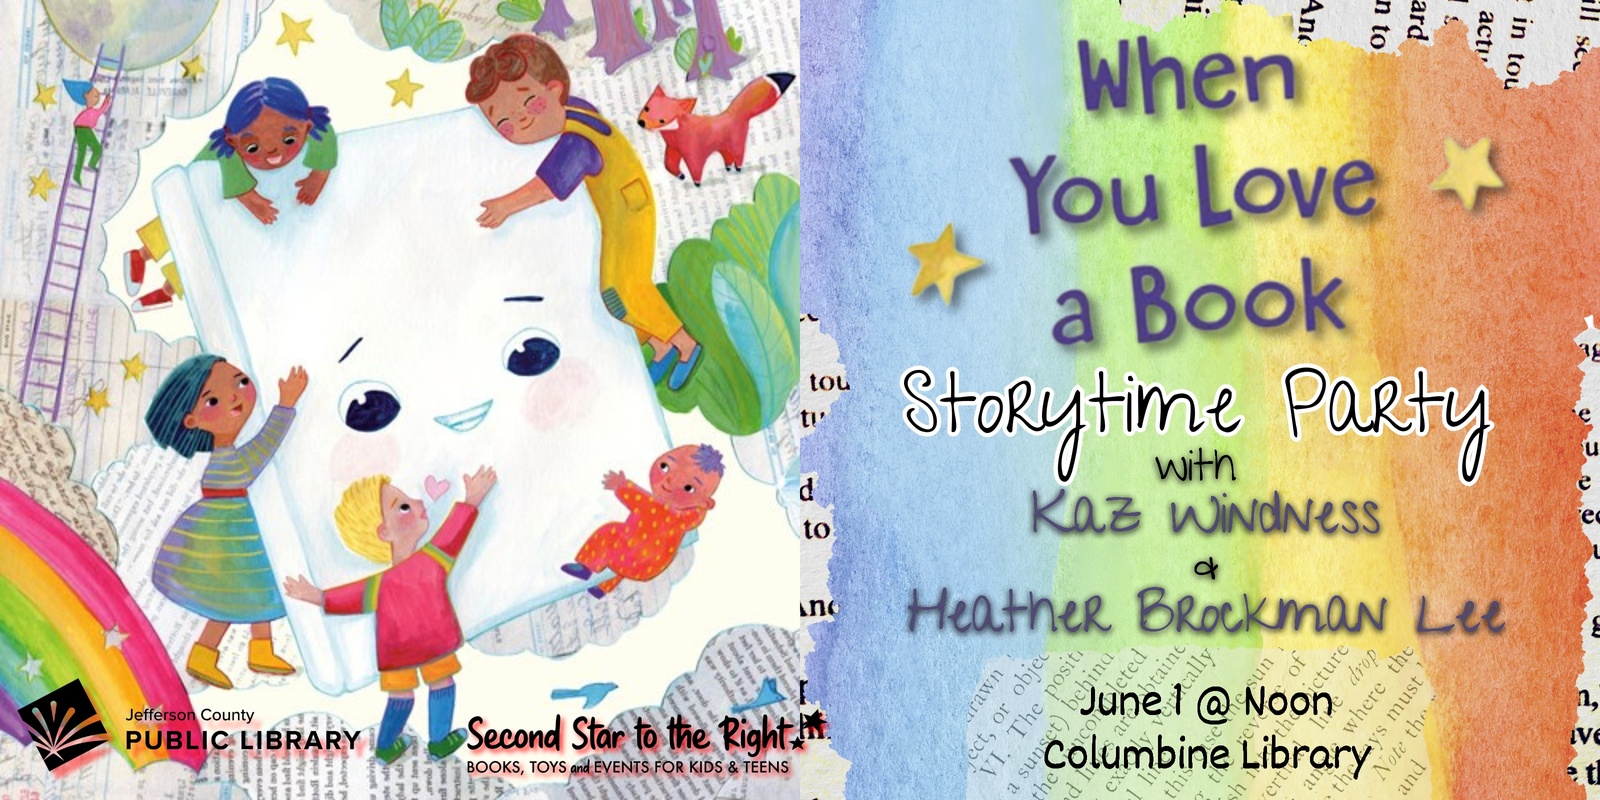 Banner image for "When You Love a Book" Storytime Party with Kaz Windness & Heather Brockman Lee